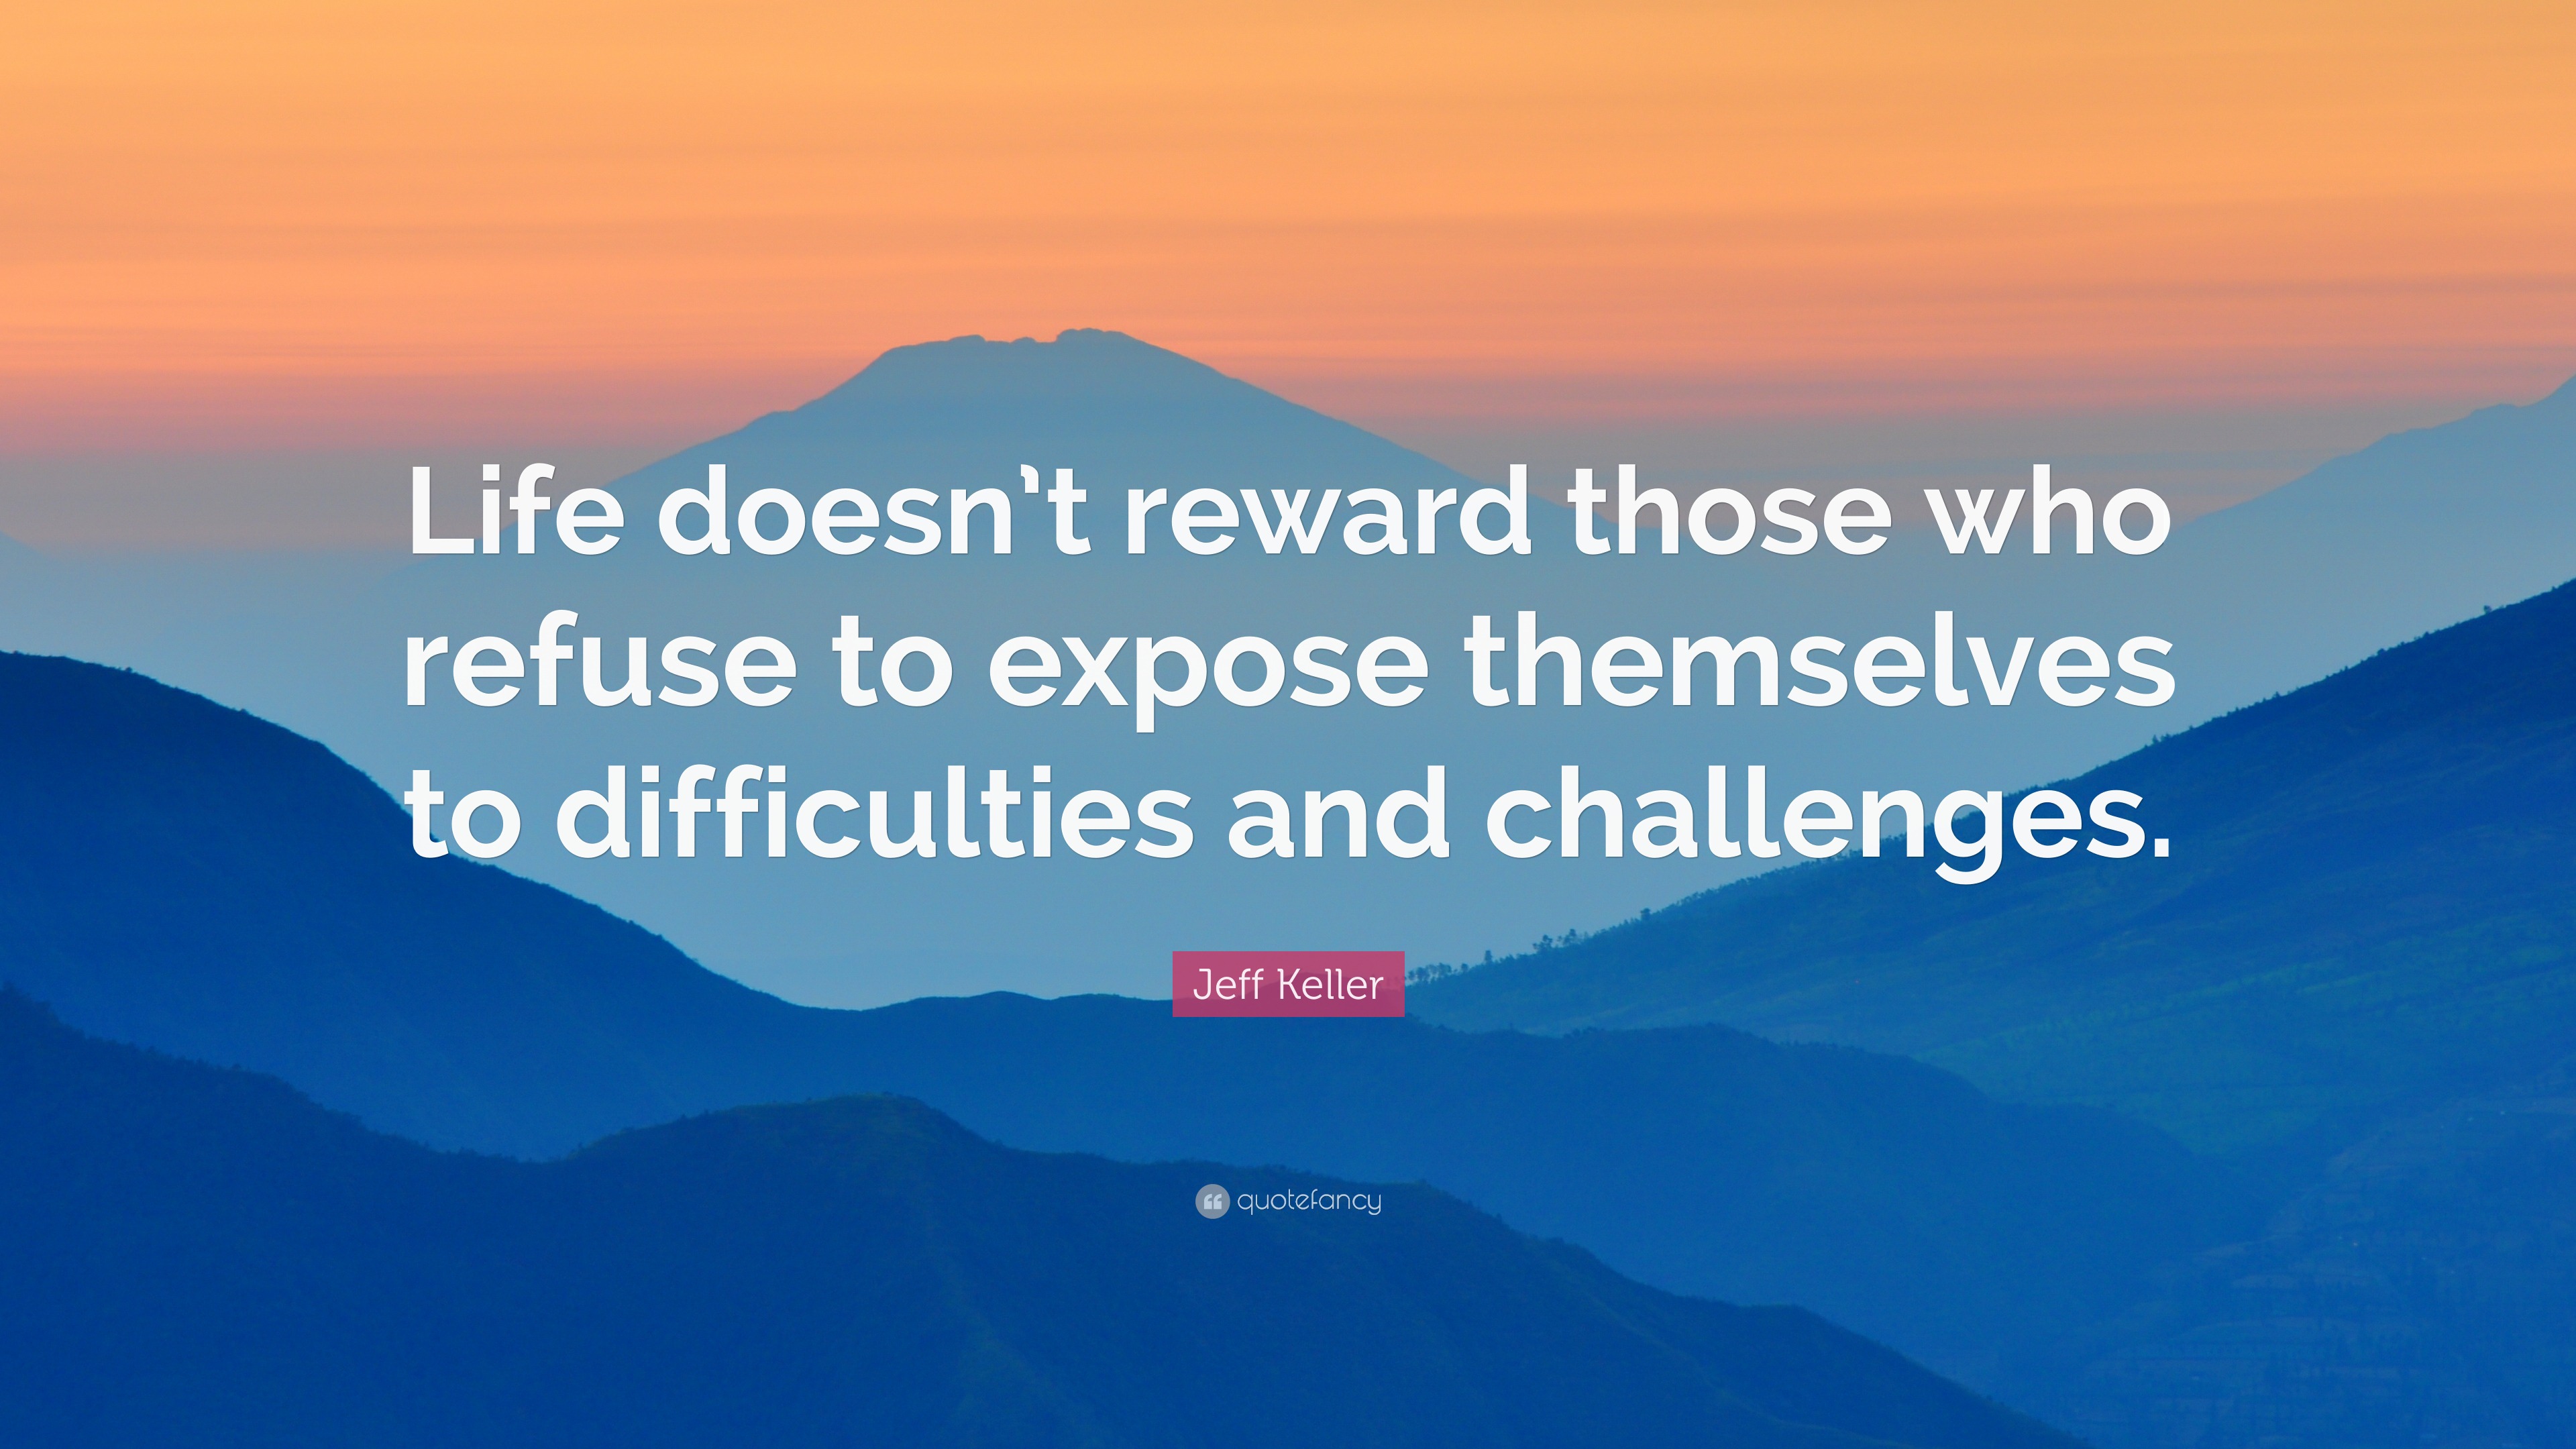 Jeff Keller Quote: “Life doesn’t reward those who refuse to expose ...